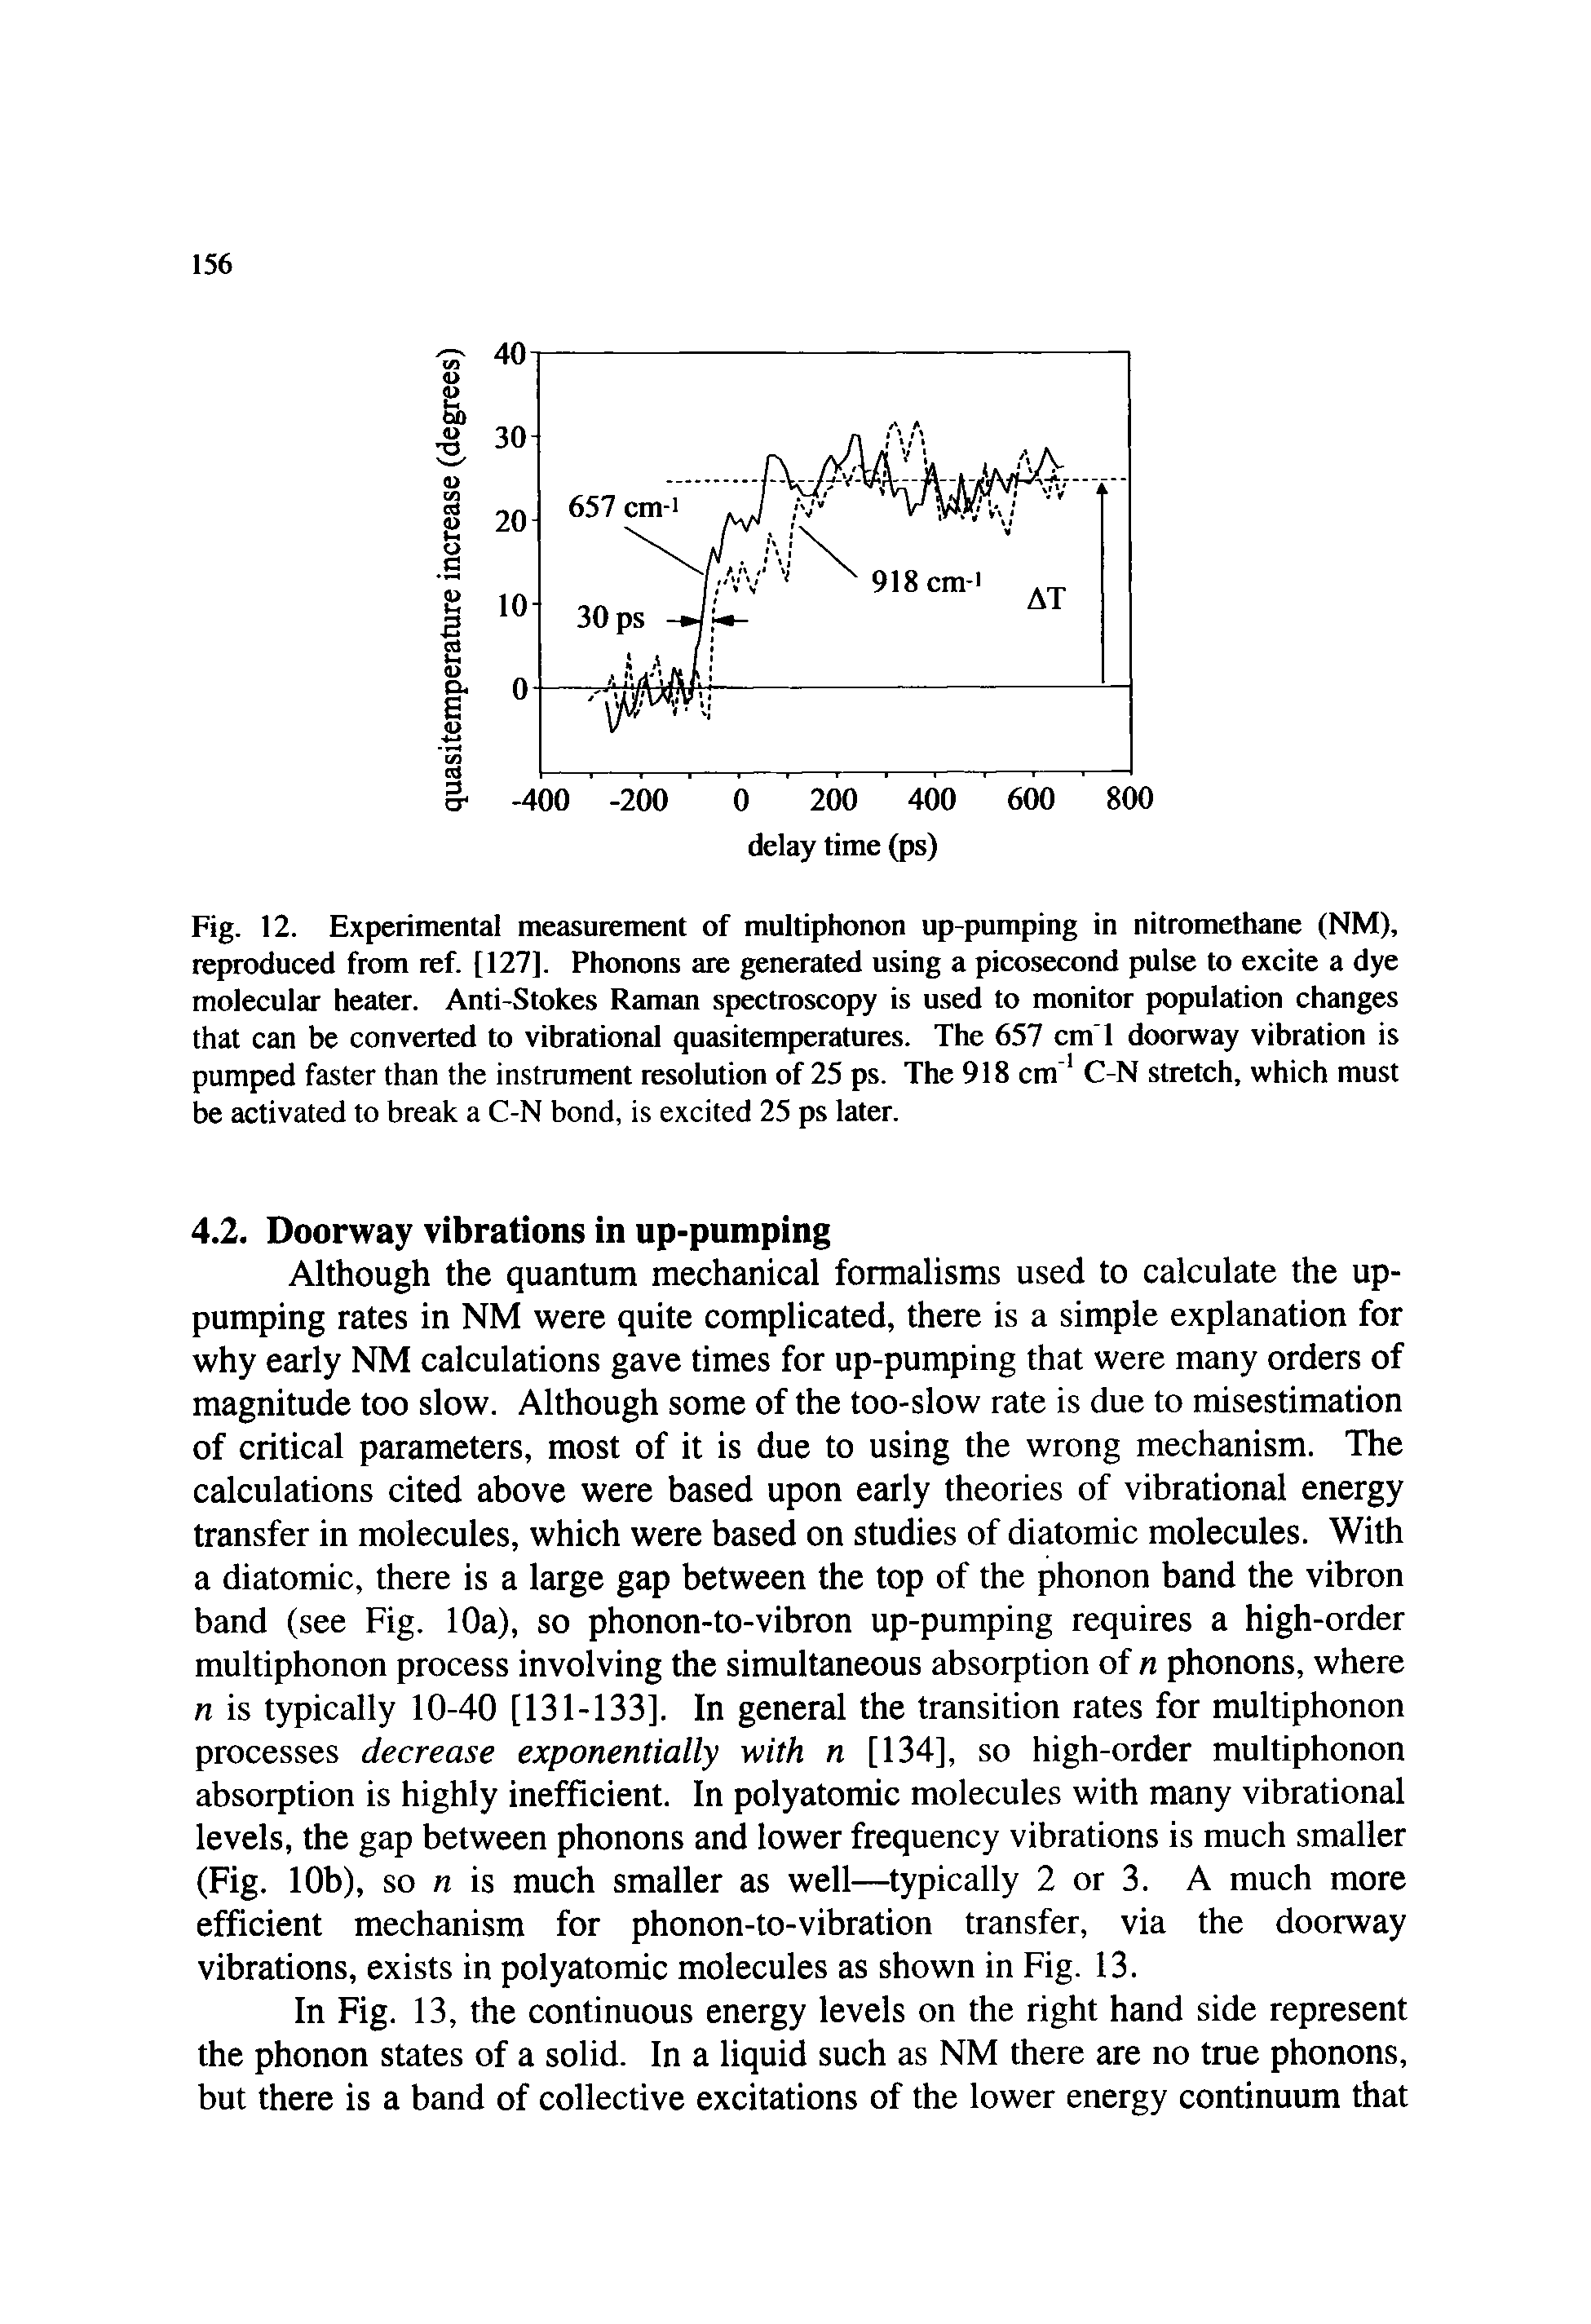 Fig. 12. Experimental measurement of multiphonon up-pumping in nitromethane (NM), reproduced from ref. [127]. Phonons are generated using a picosecond pulse to excite a dye molecular heater. Anti-Stokes Raman spectroscopy is used to monitor population changes that can be converted to vibrational quasitemperatures. The 657 cm 1 doorway vibration is pumped faster than the instrument resolution of 25 ps. The 918 cm C-N stretch, which must be activated to break a C-N bond, is excited 25 ps later.